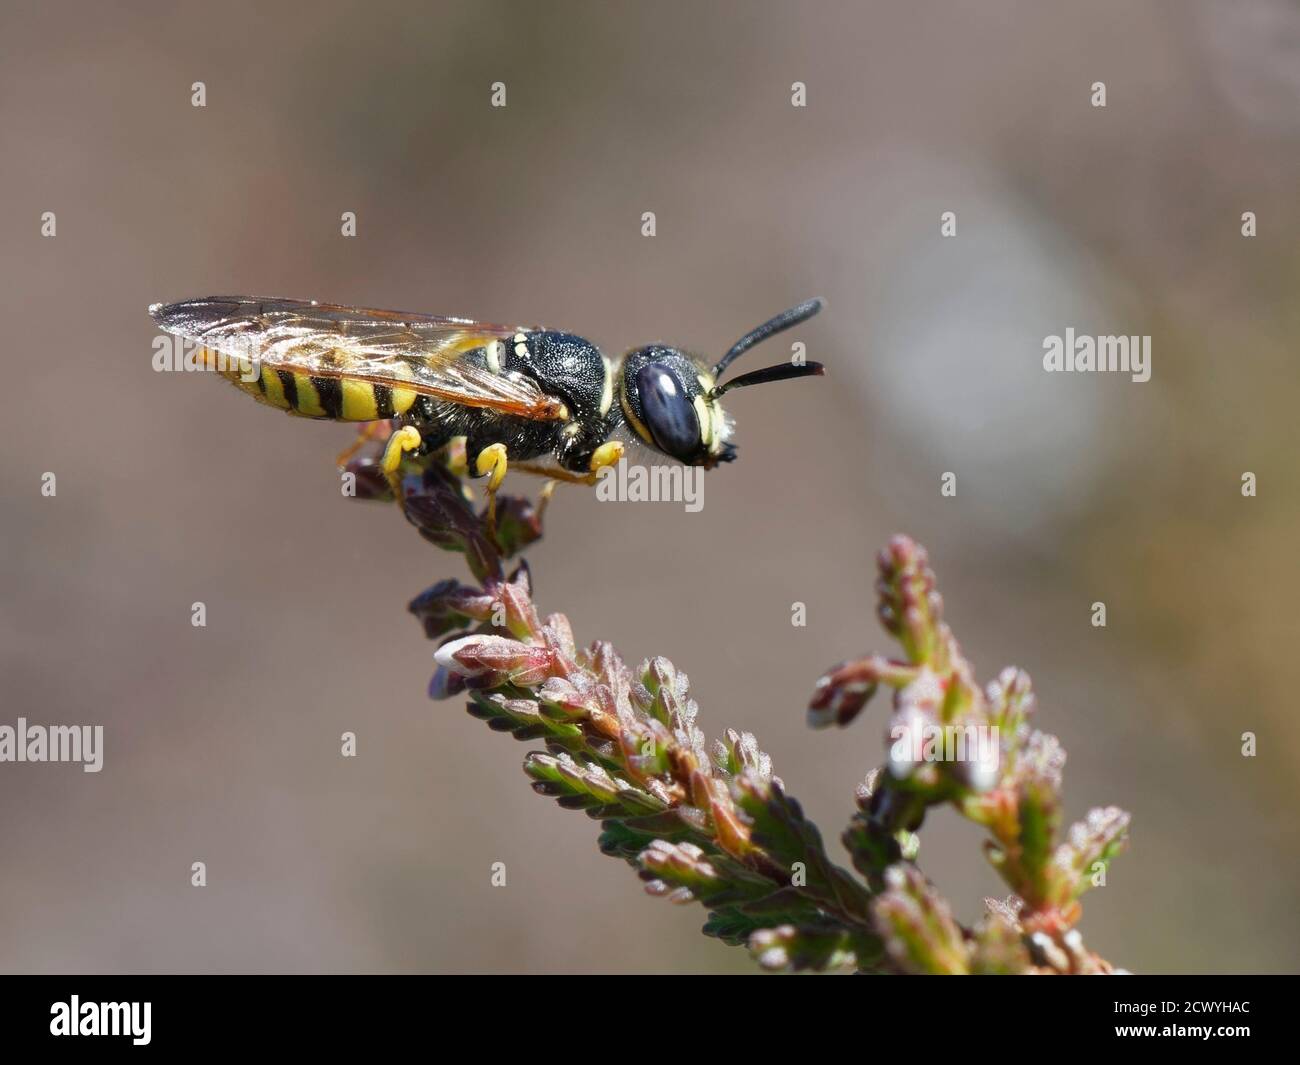 Bee wolf / Bee-killer wasp (Philanthus triangulum) male perched on heather in a small mating territory which he has marked with pheromones, Dorset, UK. Stock Photo